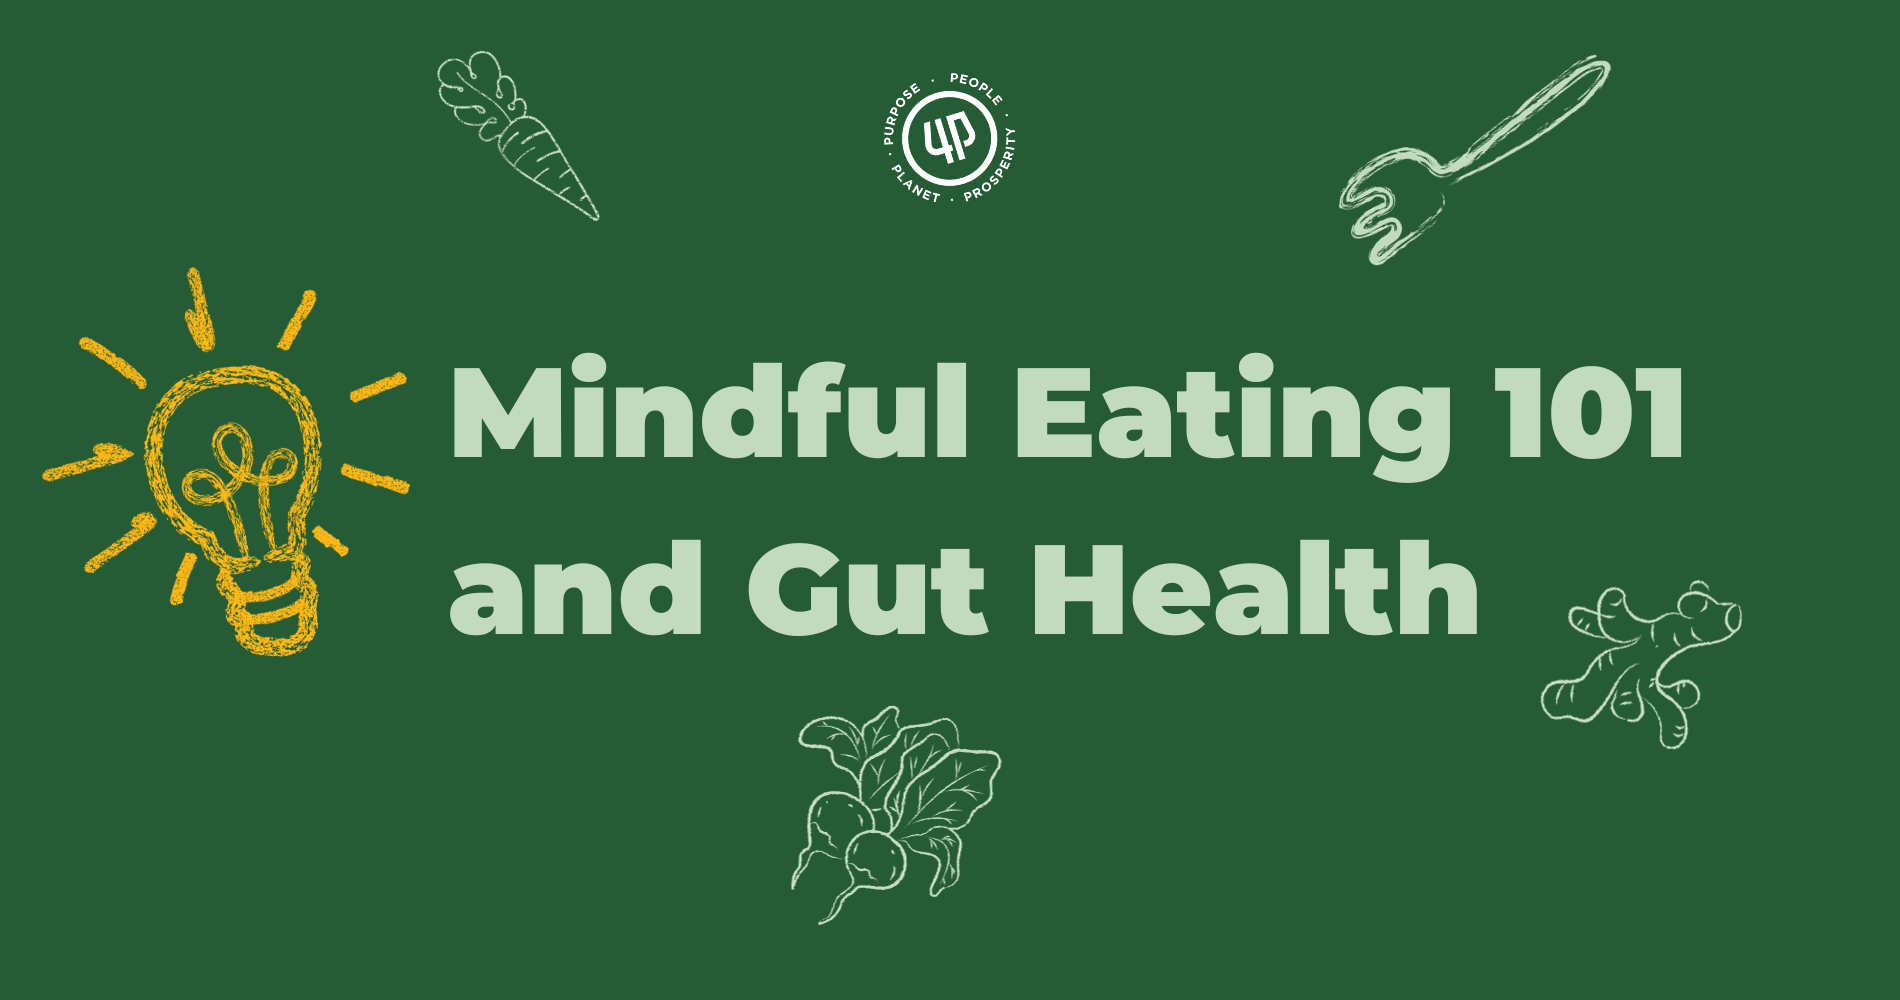 Mindful Eating 101 and Gut Health image